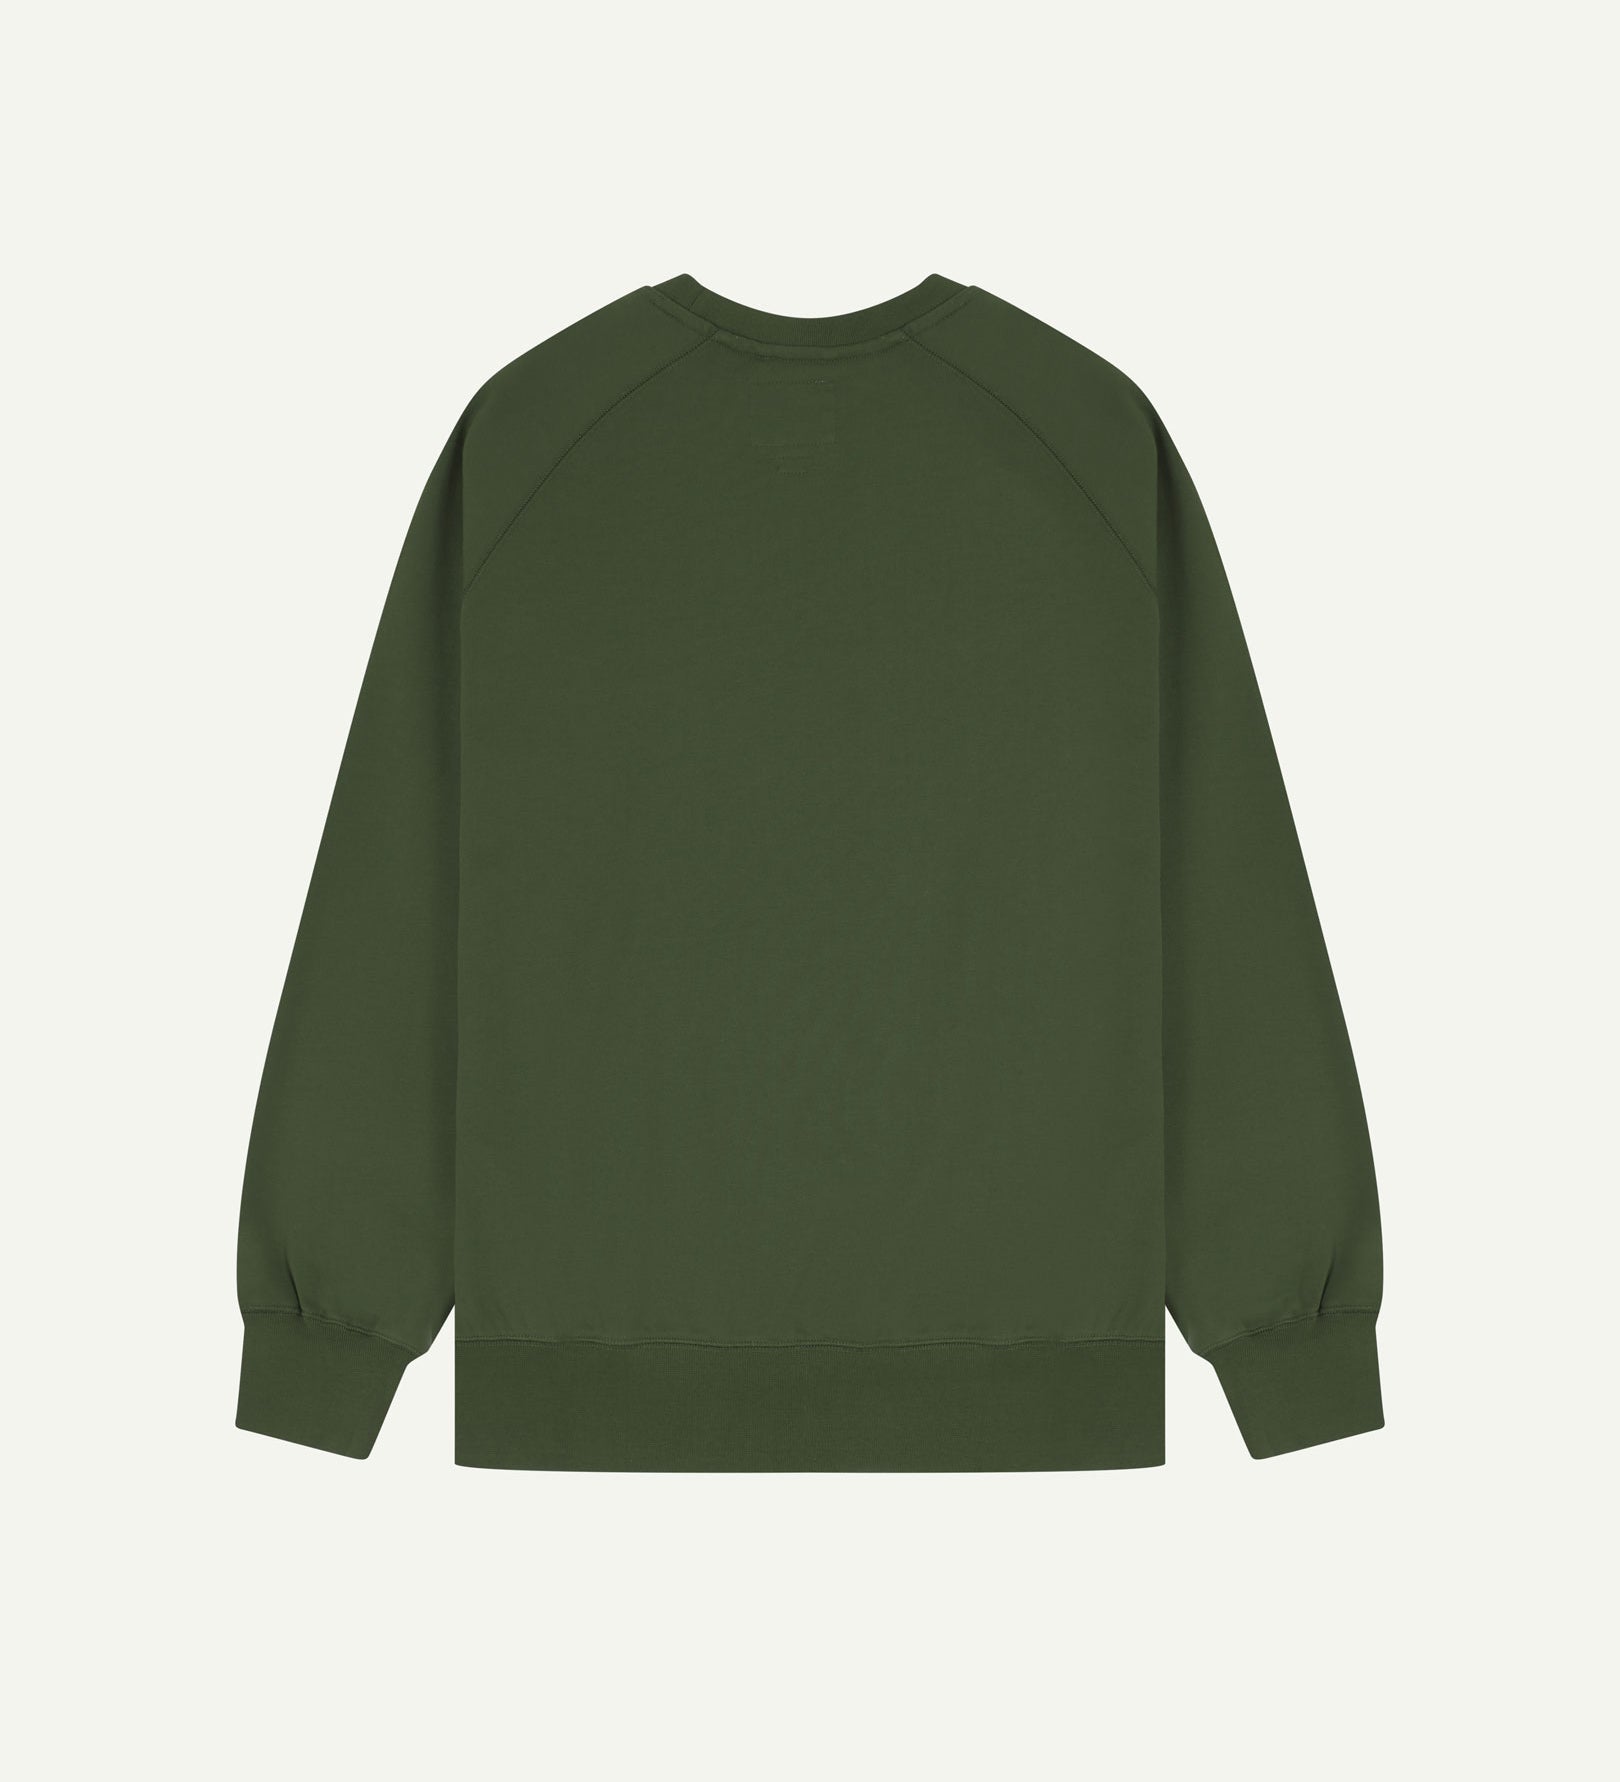 Back view of men's coriander-green organic heavyweight cotton 7005 jersey sweatshirt by Uskees, showing ribbed cuffs and hem.